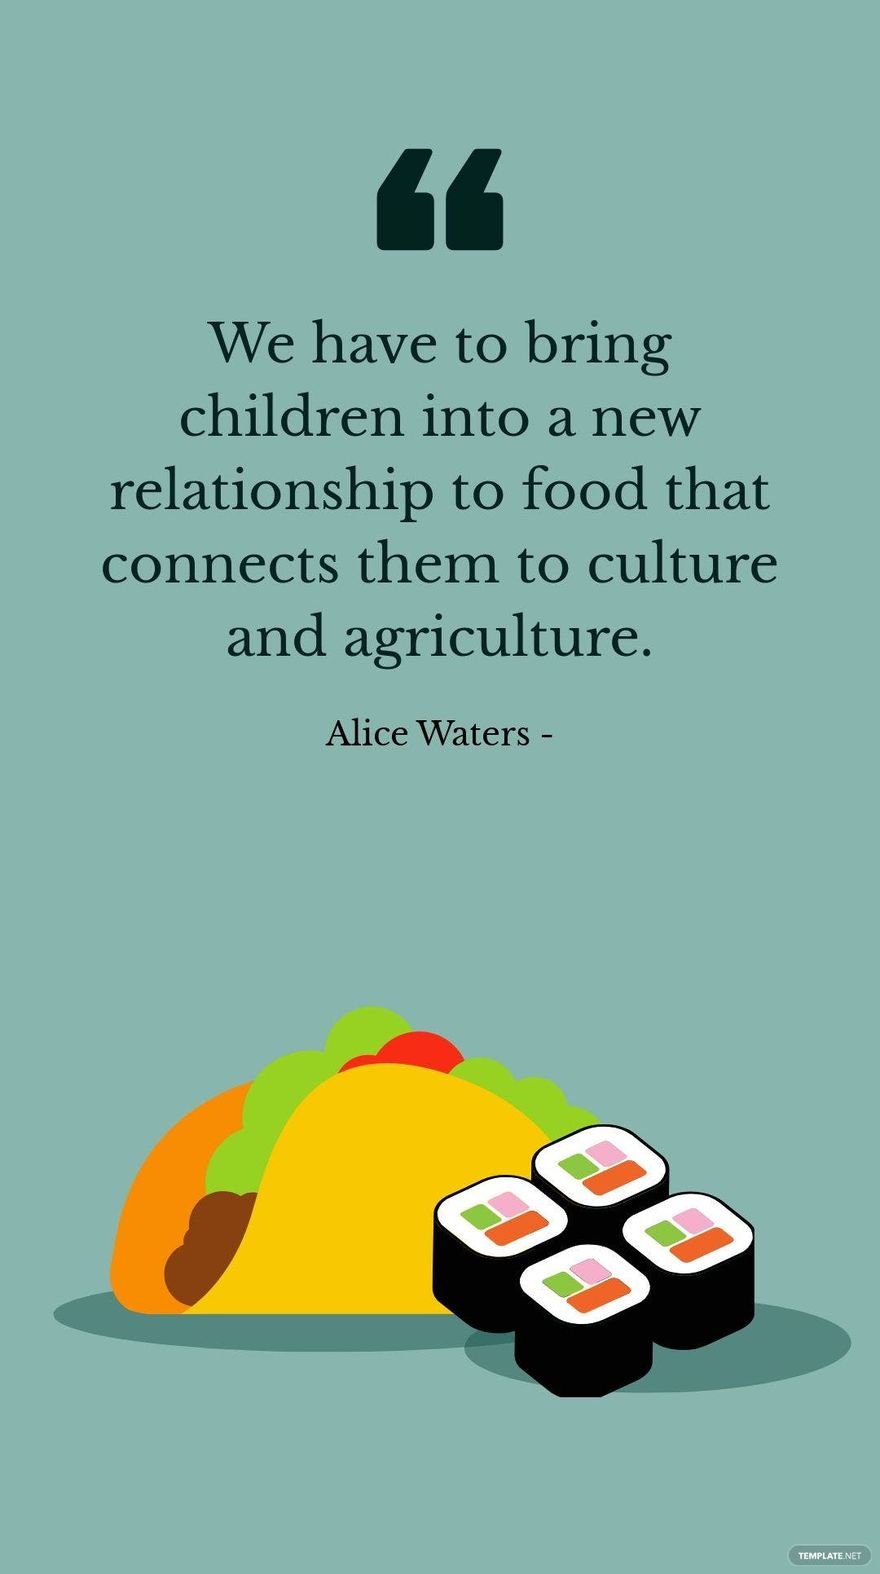 Alice Waters - We have to bring children into a new relationship to food that connects them to culture and agriculture.